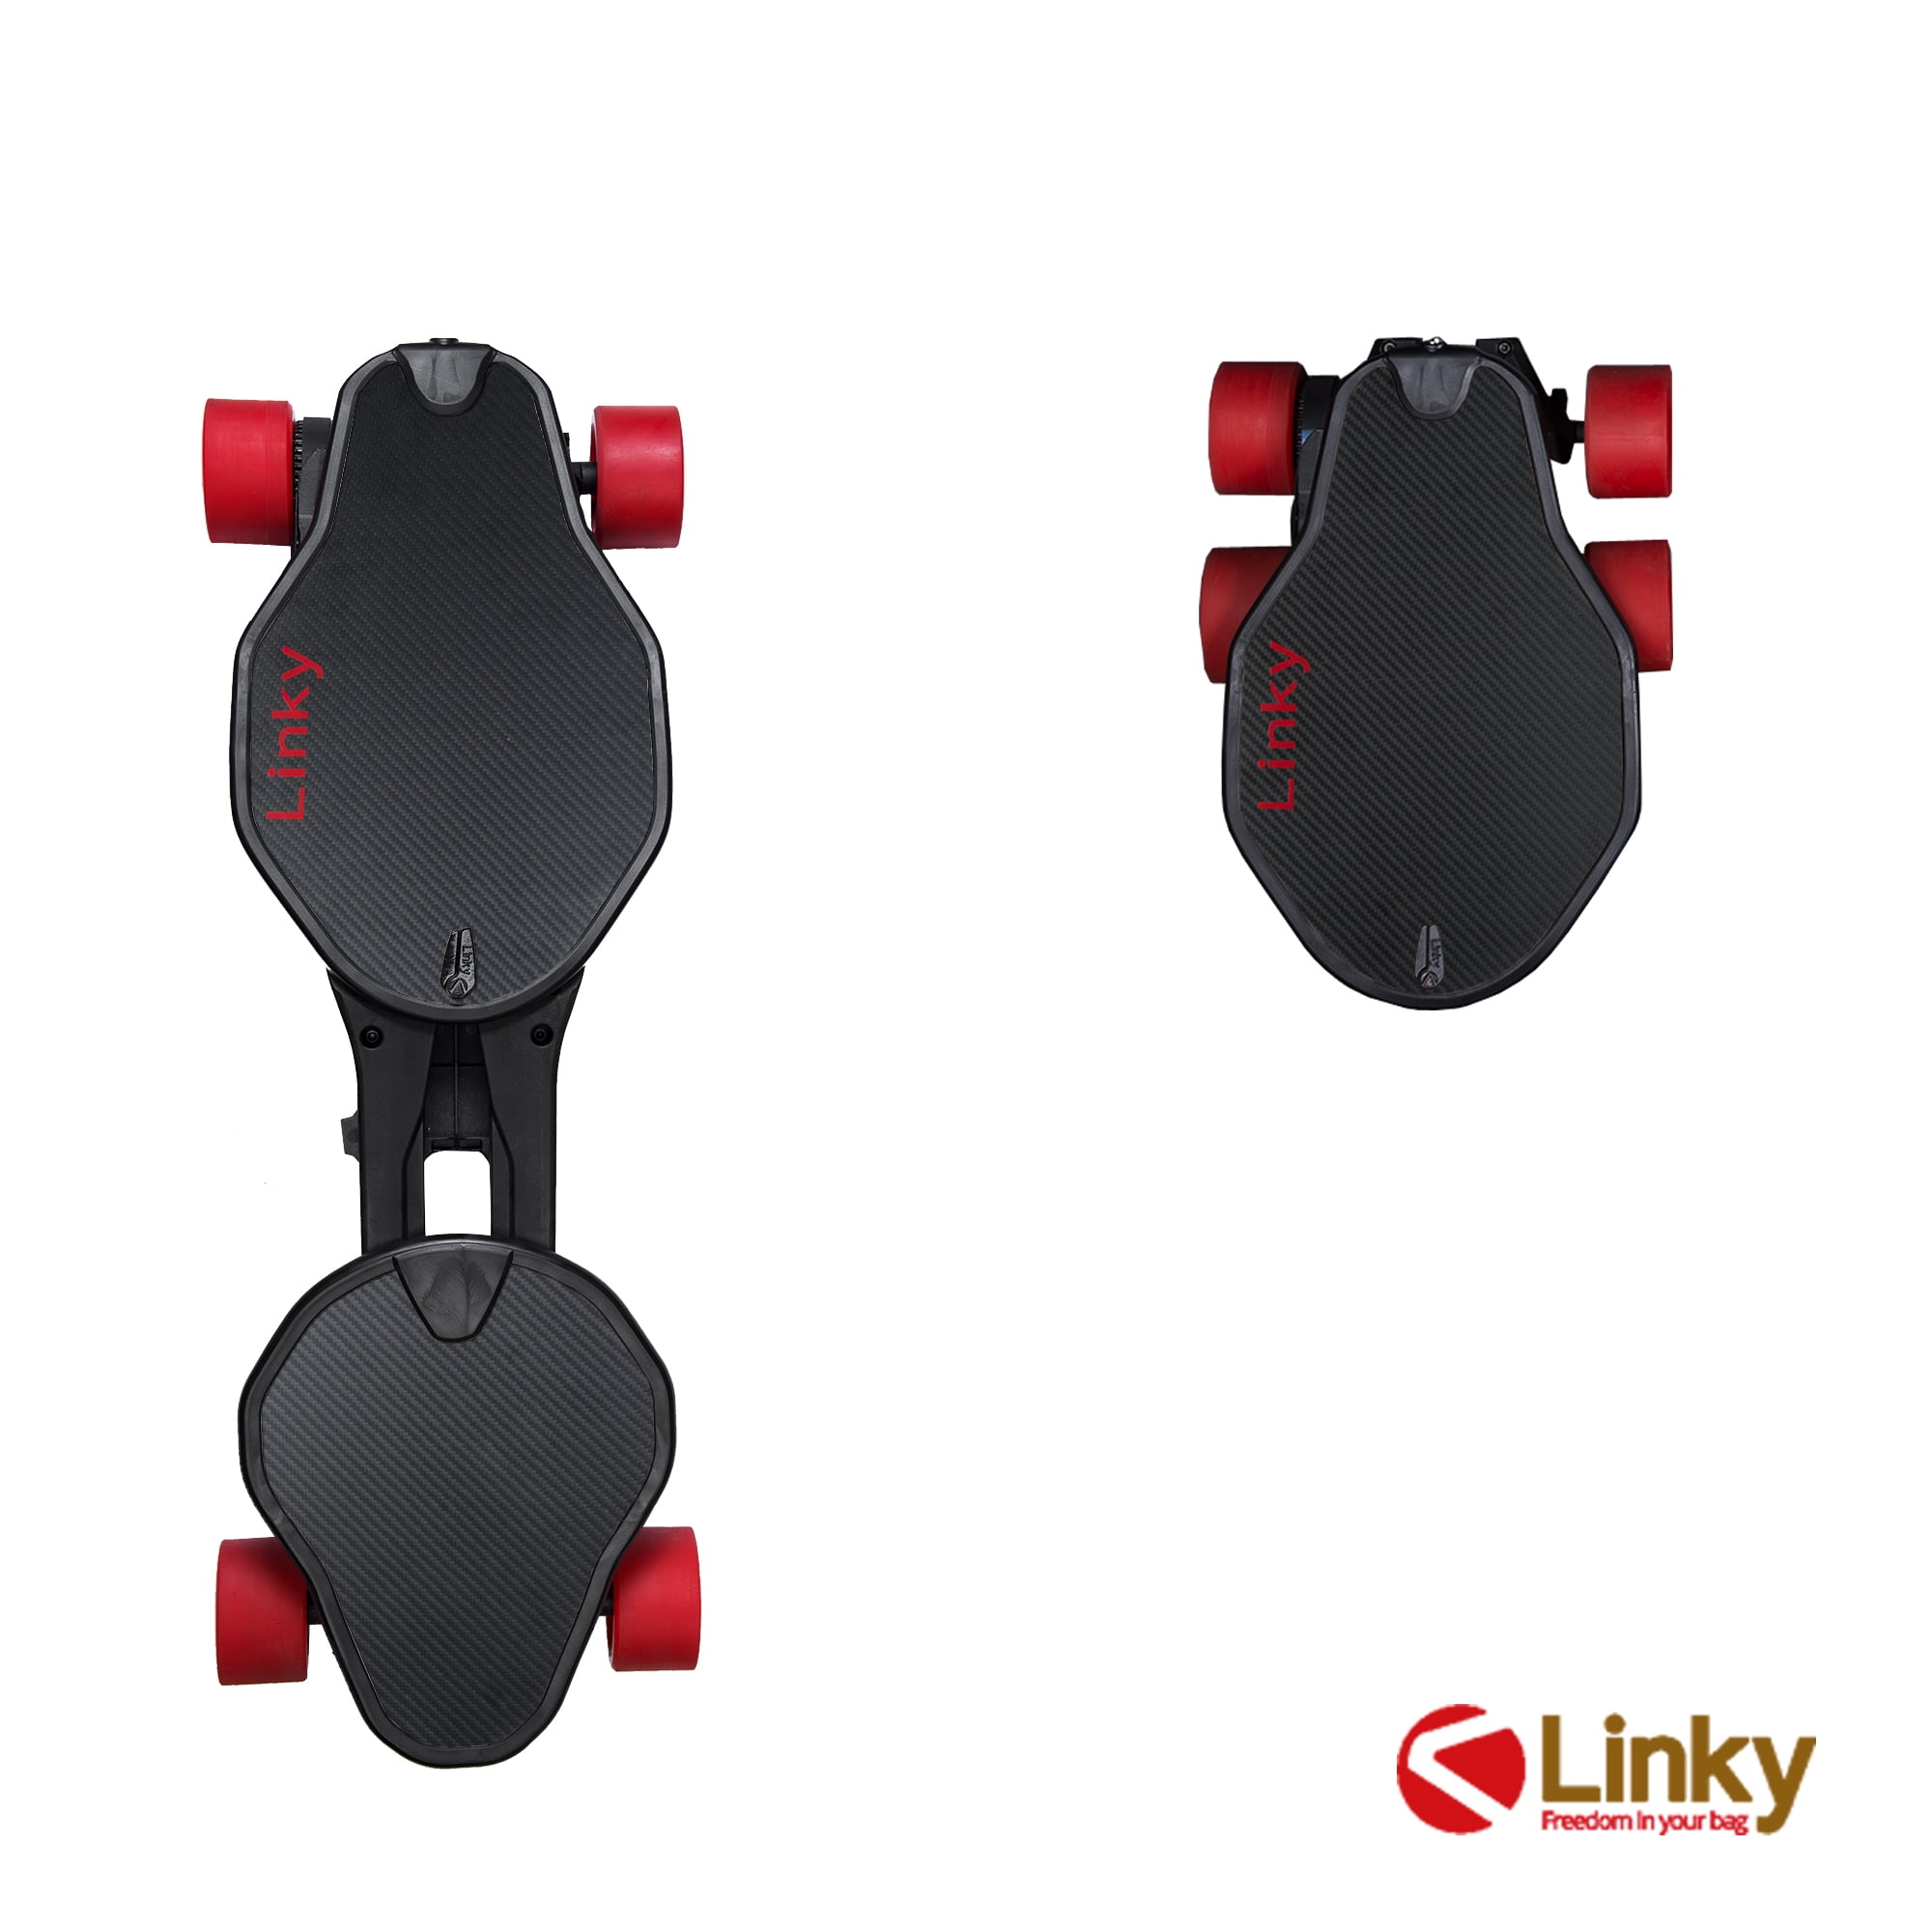 Linky Foldable Electric Longboard, 32" Electric Skateboard with Remote Controller and LED Light, -